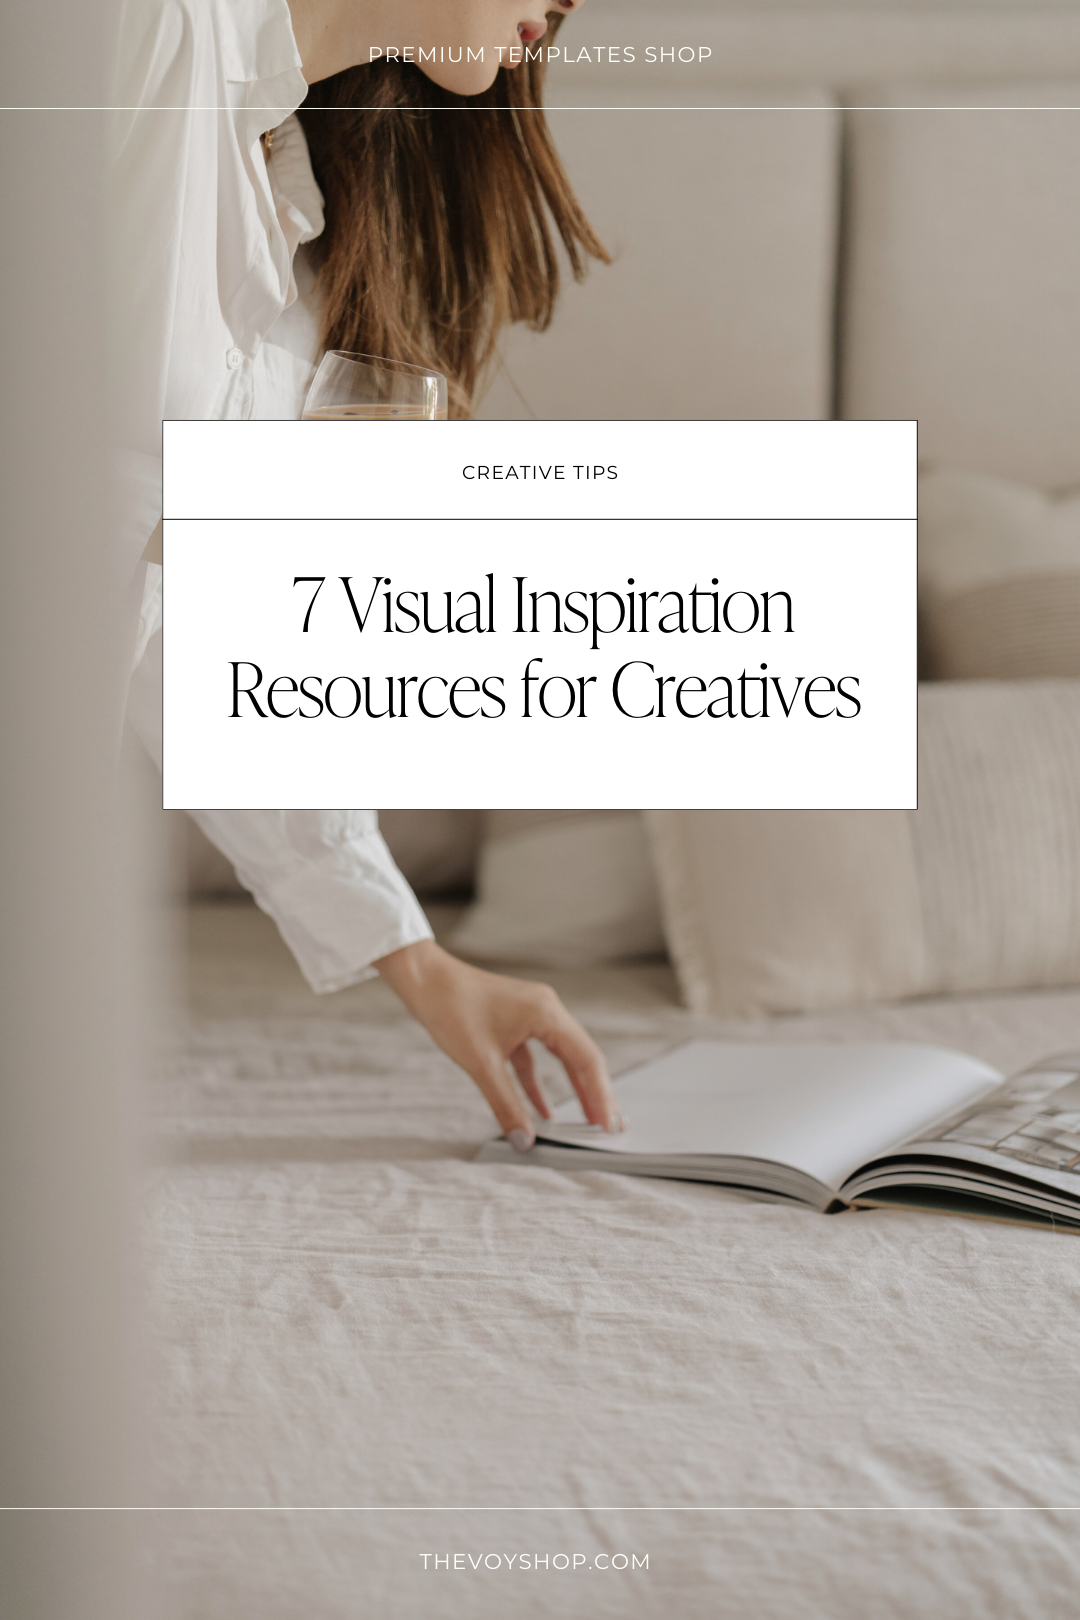 Top 7 Visual Inspiration Resources for Creatives